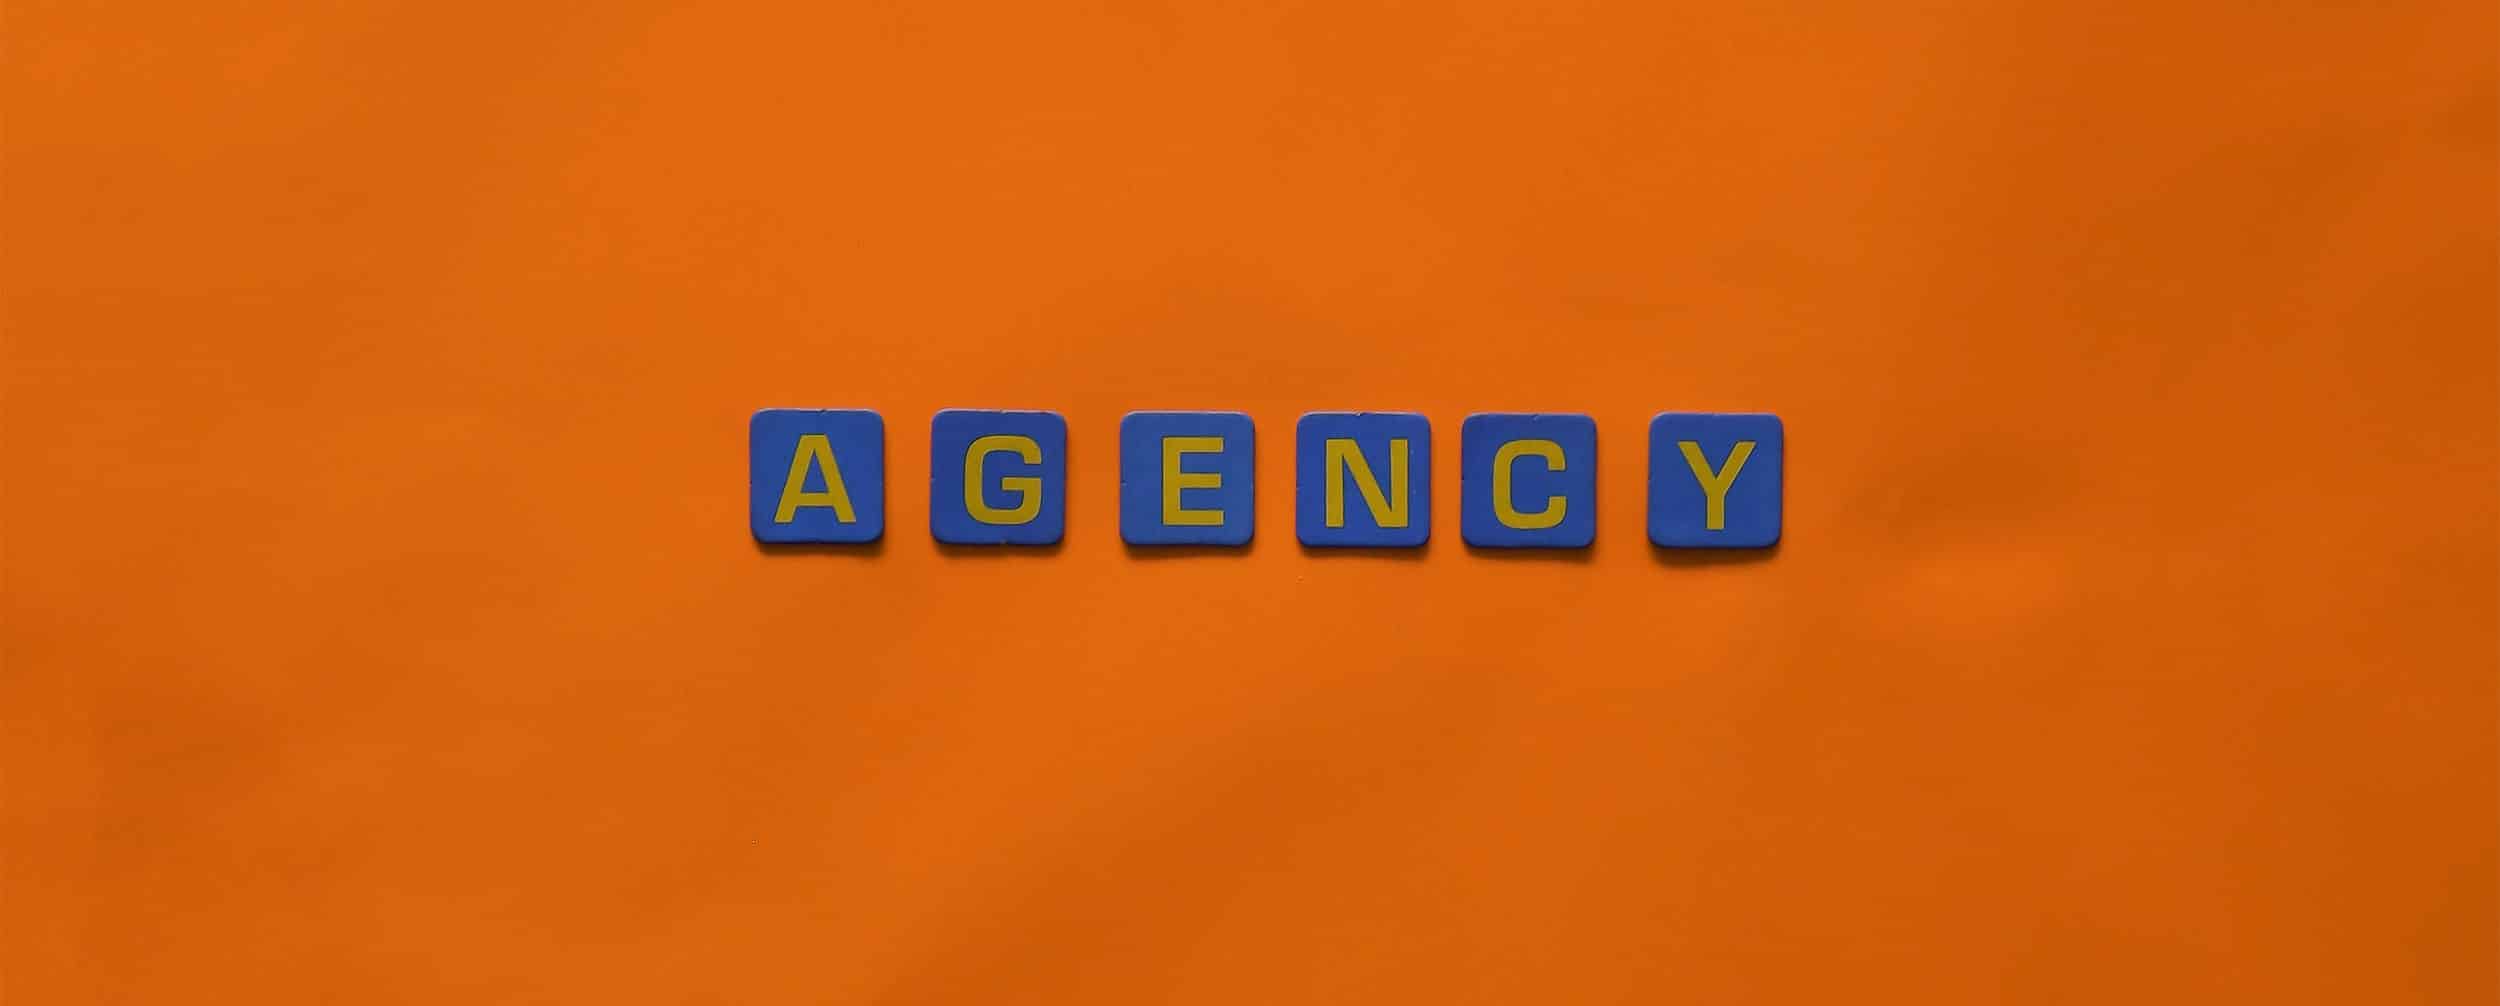 10 Benefits of using a larger design agency